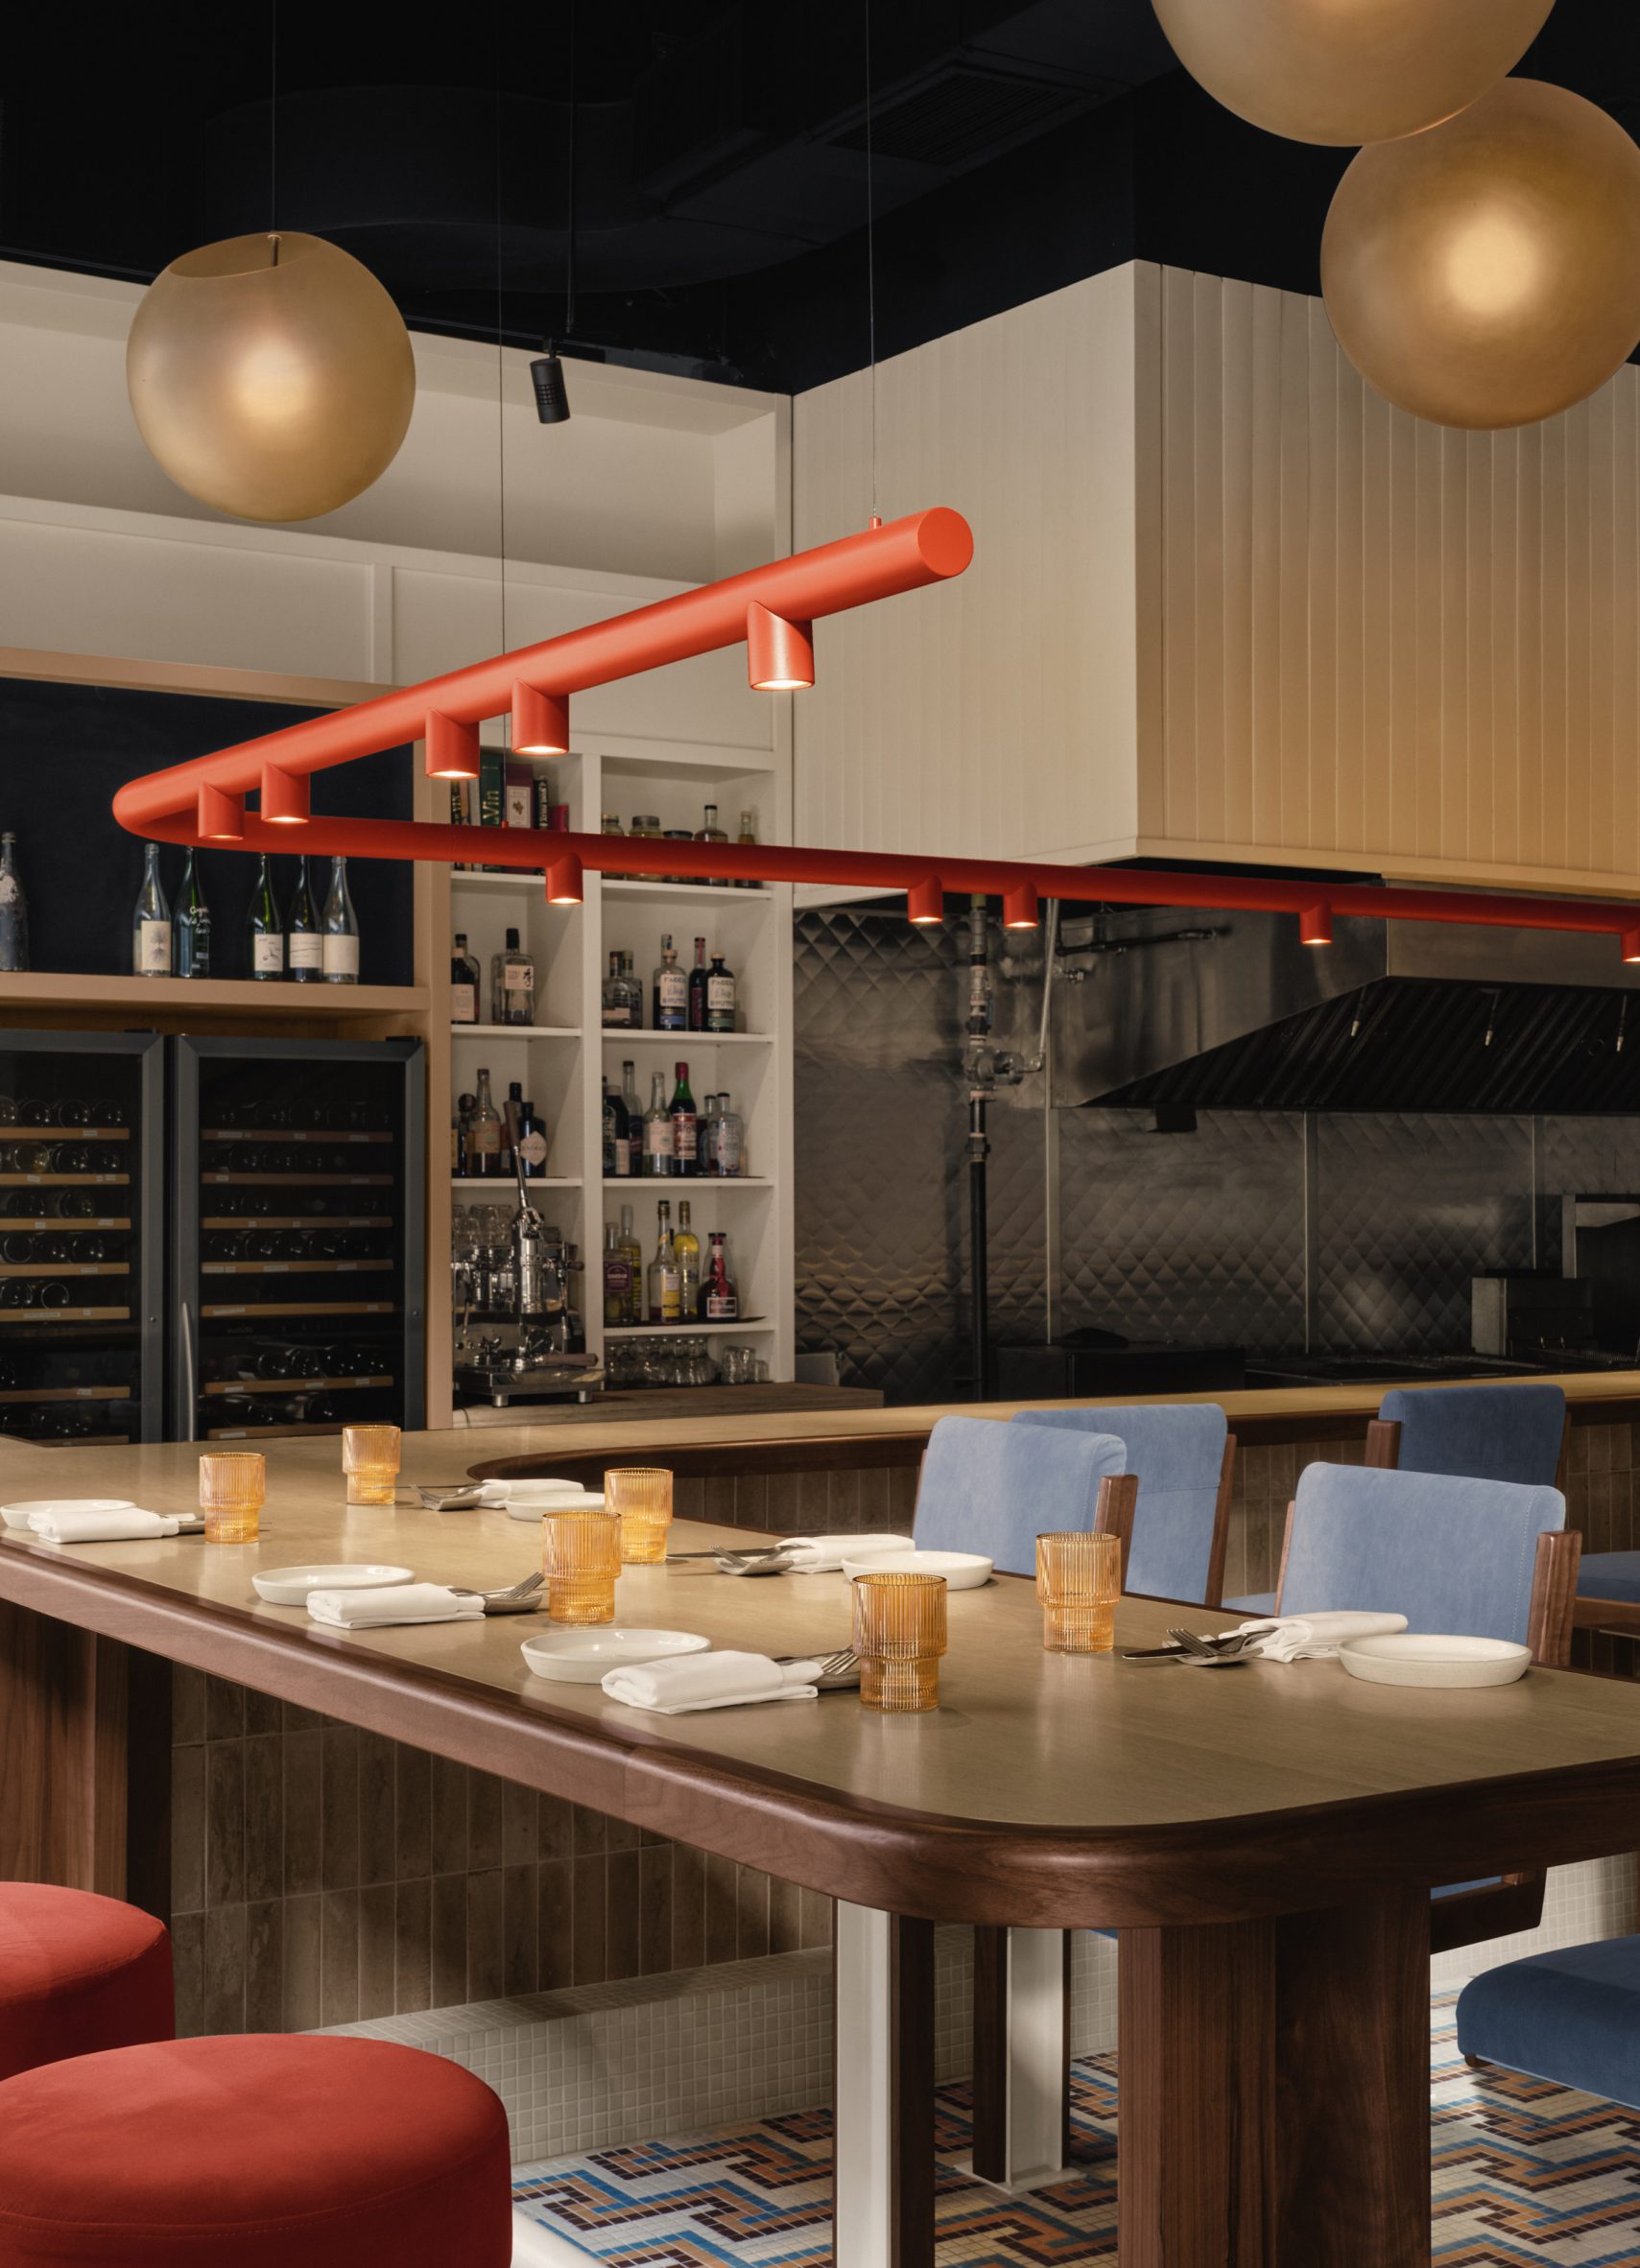 Tubular orange light above a bar counter with blue seating